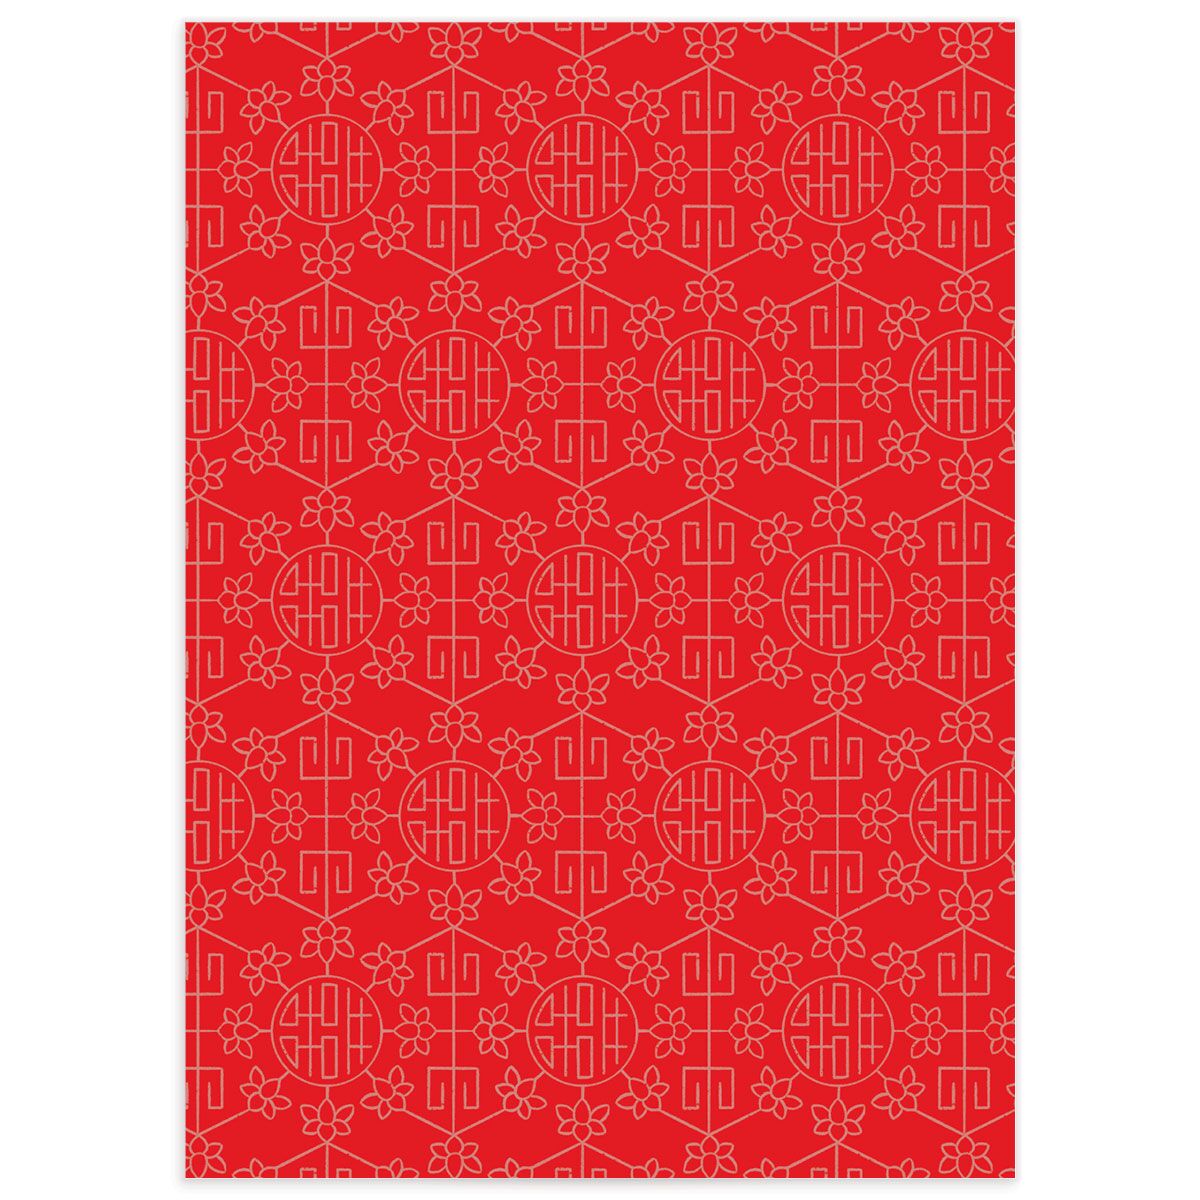 Double Happiness Wedding Enclosure Cards back in red